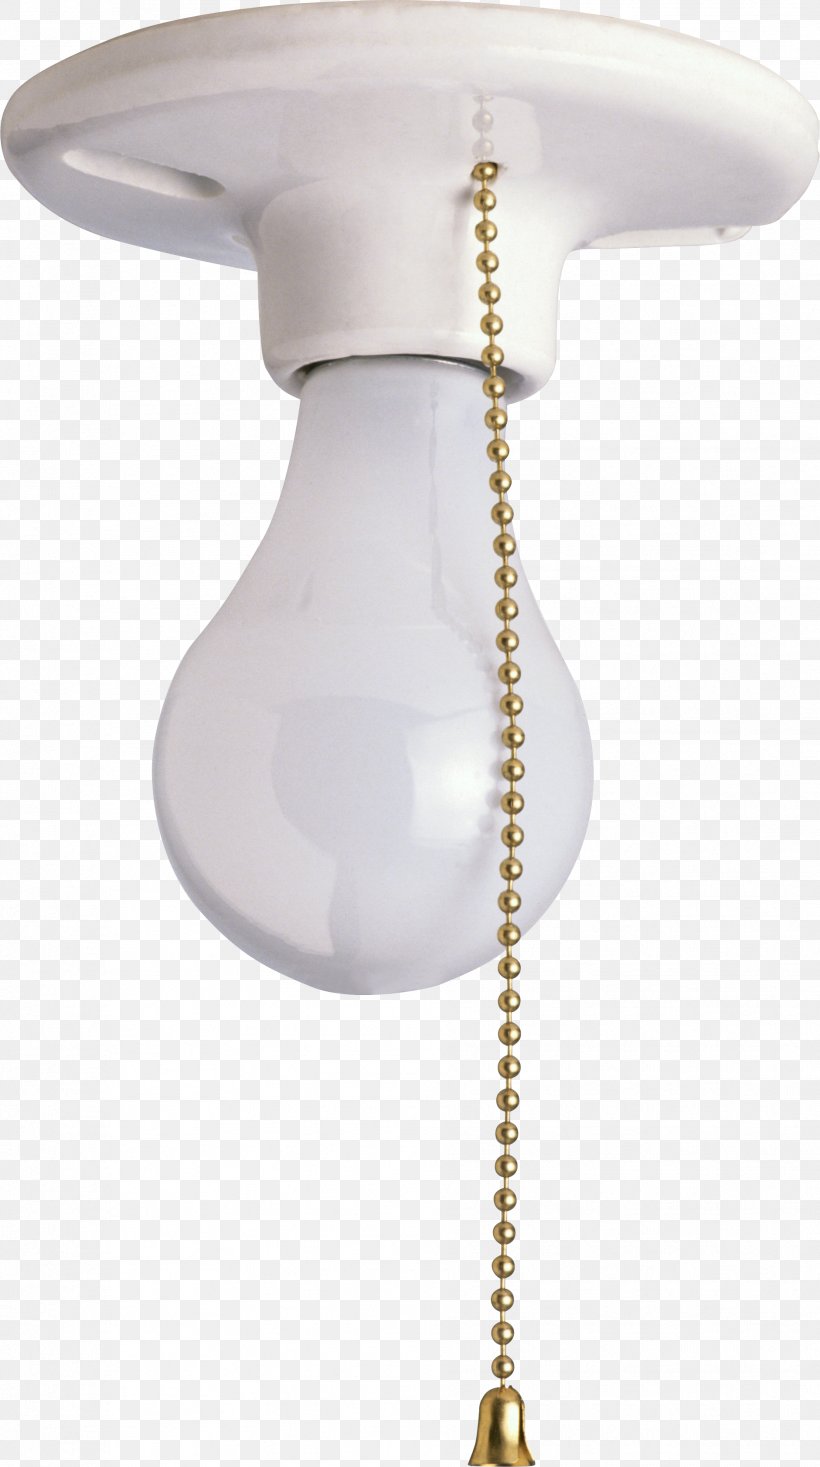 Incandescent Light Bulb Lighting Electrical Filament, PNG, 1881x3366px, Light, Ceiling Fixture, Electrical Filament, Electricity, Image File Formats Download Free